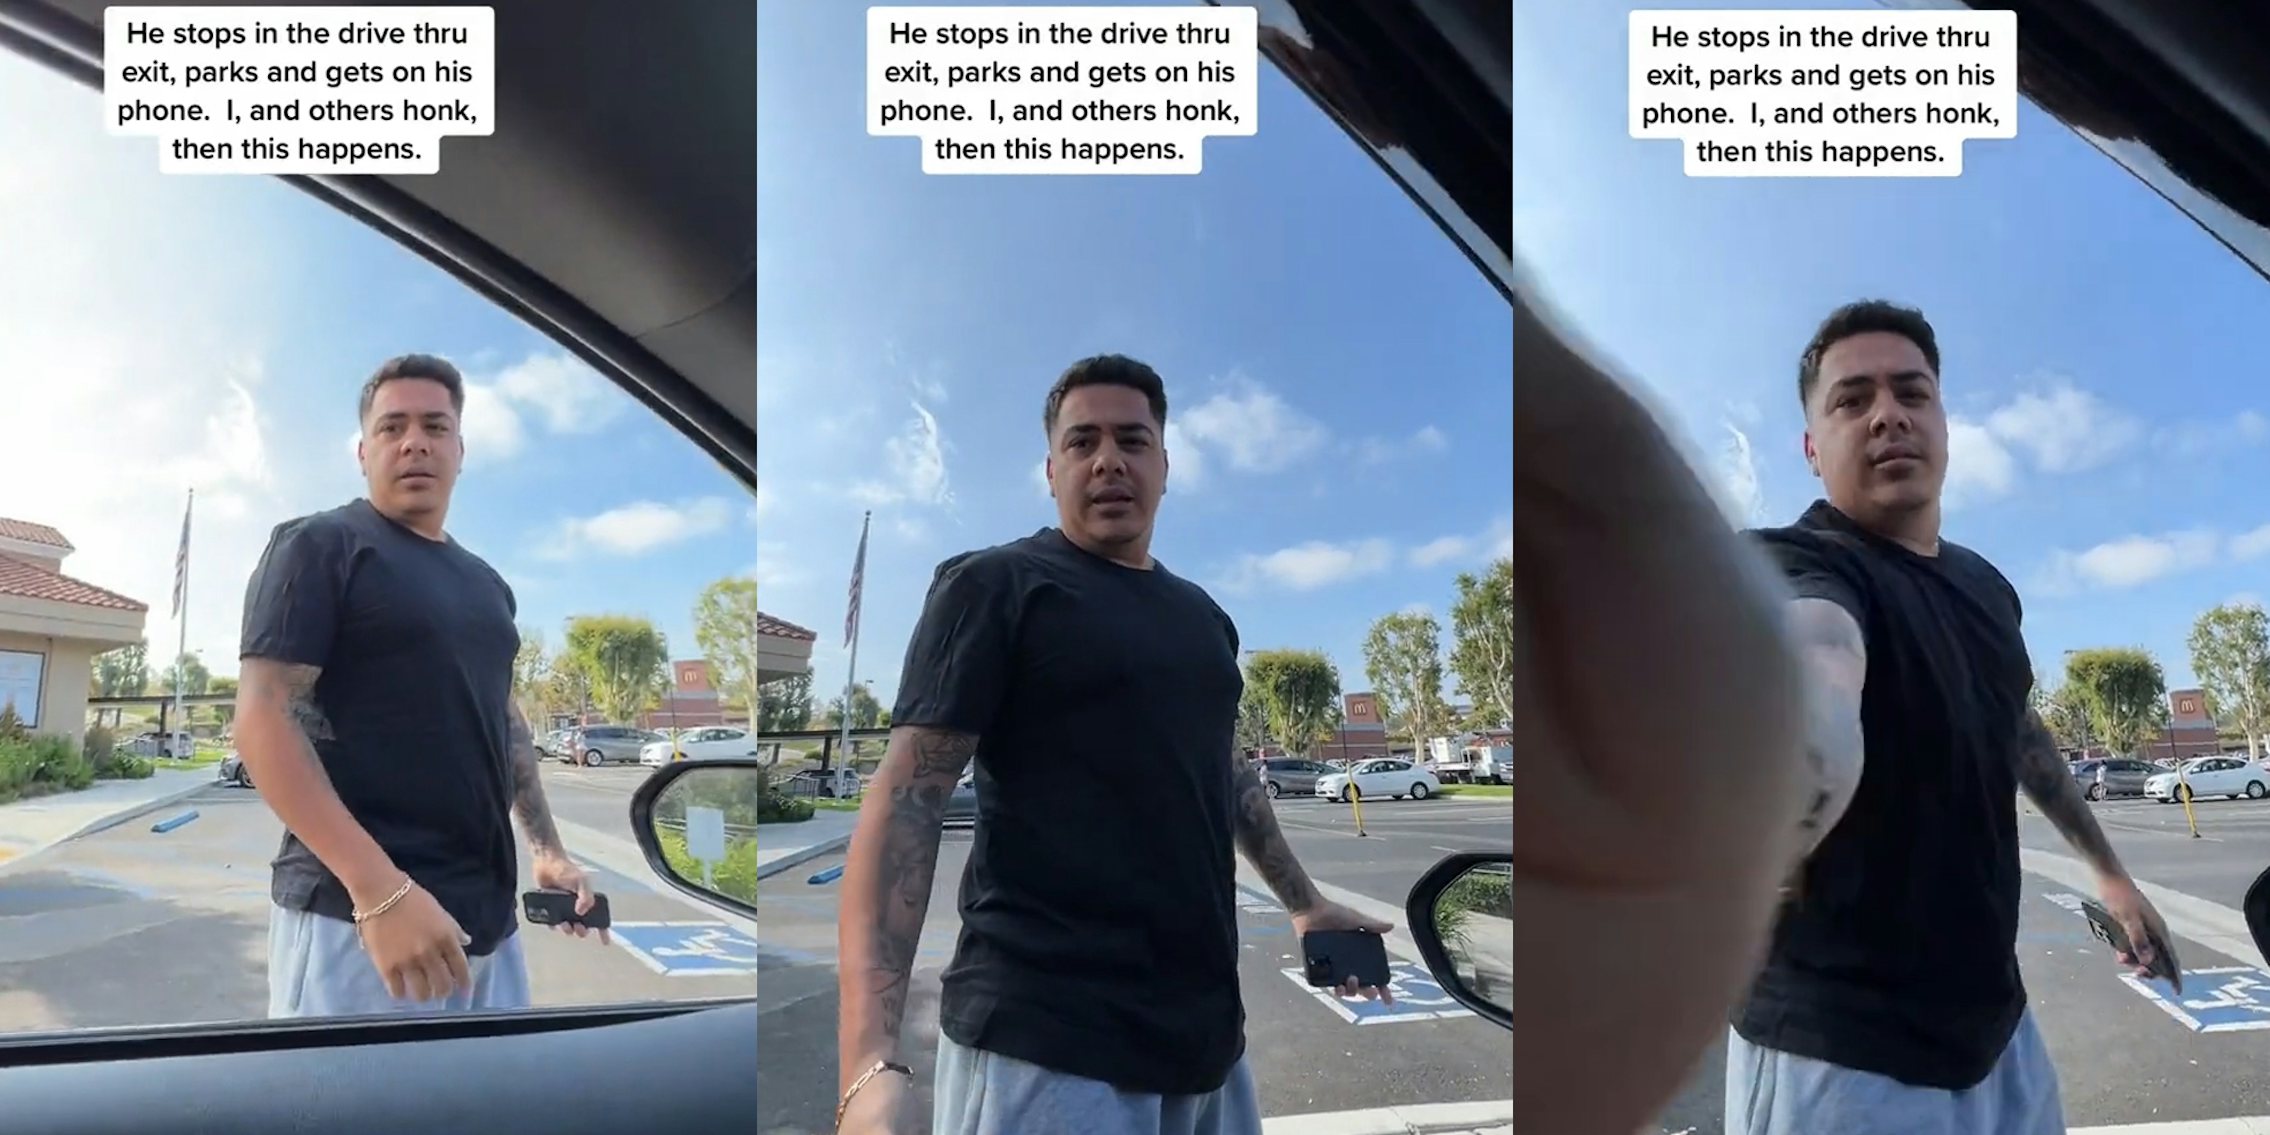 man standing outside of car in drive-thru caption 'He stops in the drive thru exit, parks and gets on his phone, I, and others honk, then this happens.' () man standing outside of car in drive-thru speaking caption 'He stops in the drive thru exit, parks and gets on his phone, I, and others honk, then this happens.' (c)man standing outside of car in drive-thru smacking phone out of hand caption 'He stops in the drive thru exit, parks and gets on his phone, I, and others honk, then this happens.' (r)